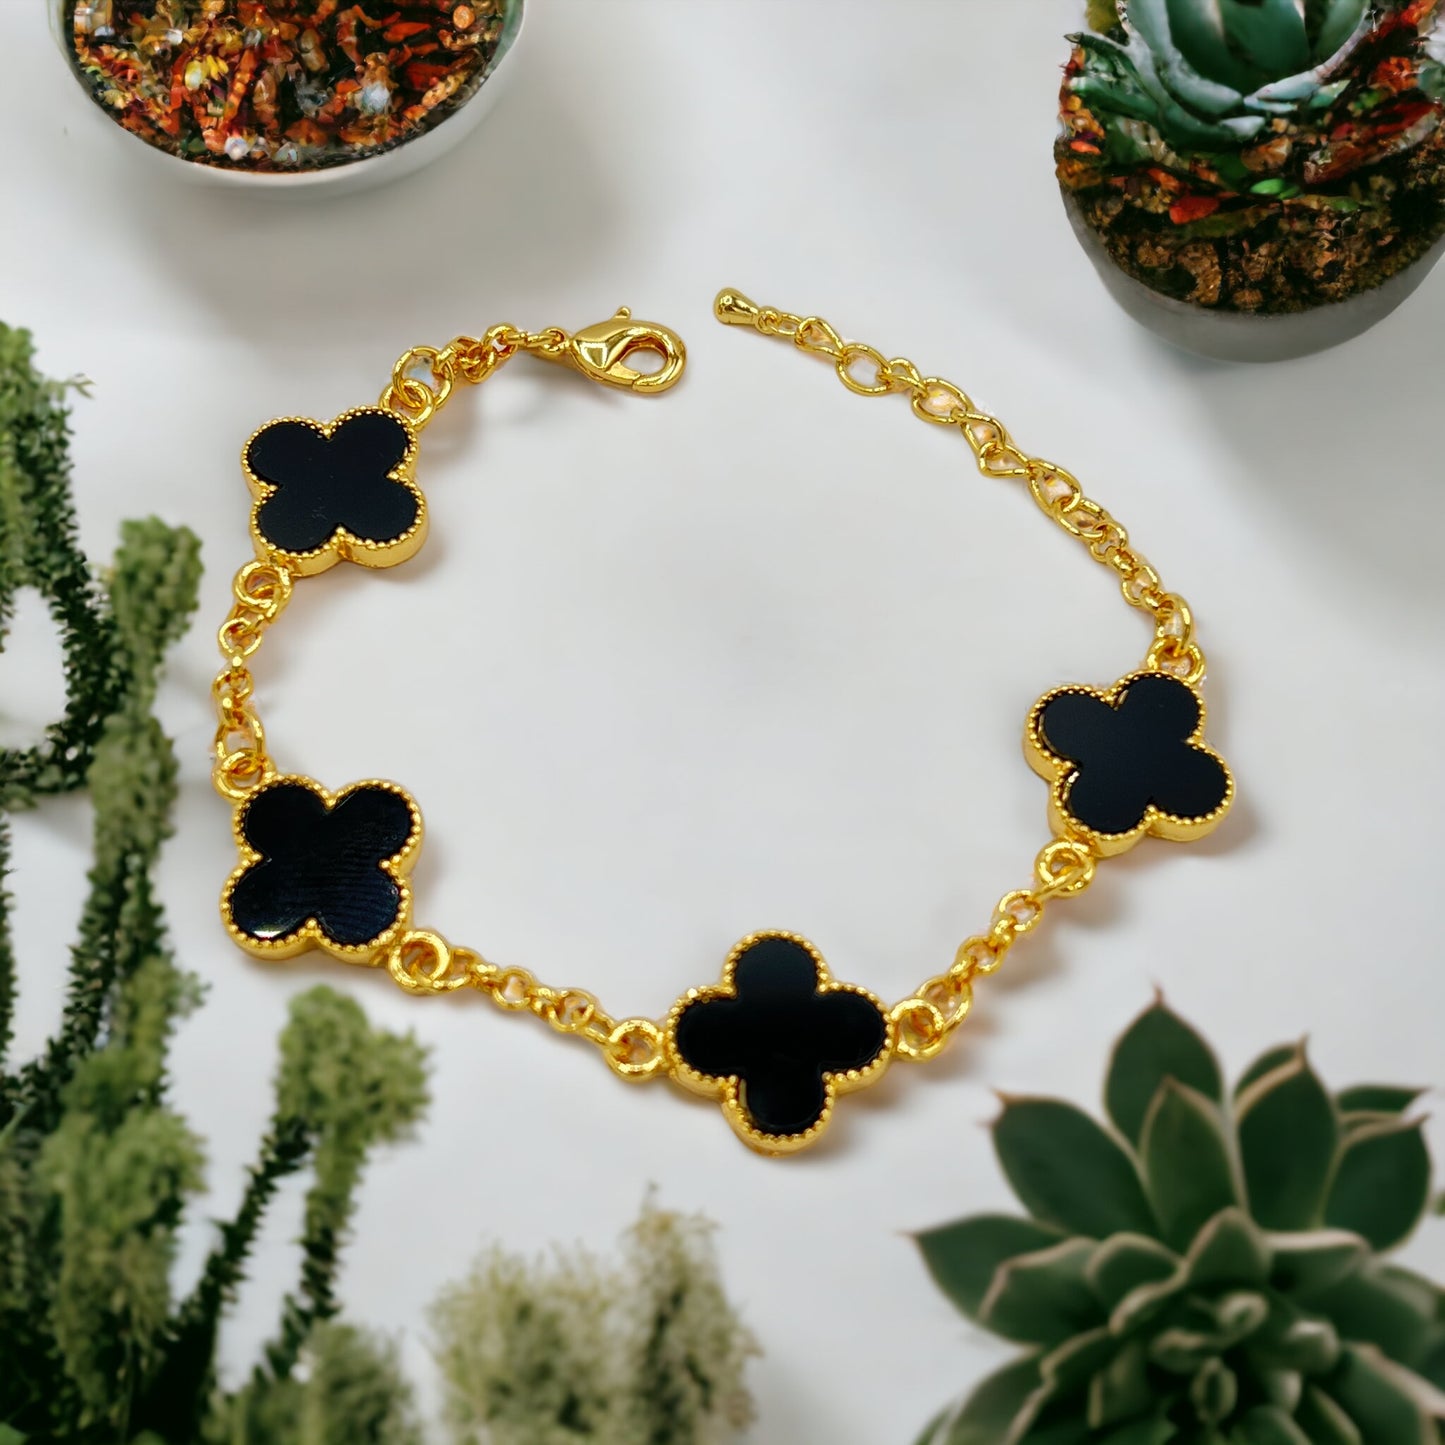 Gilded Luck: 22k Gold-Plated Clover Chain Bracelets – Timeless Charm for Every Wrist